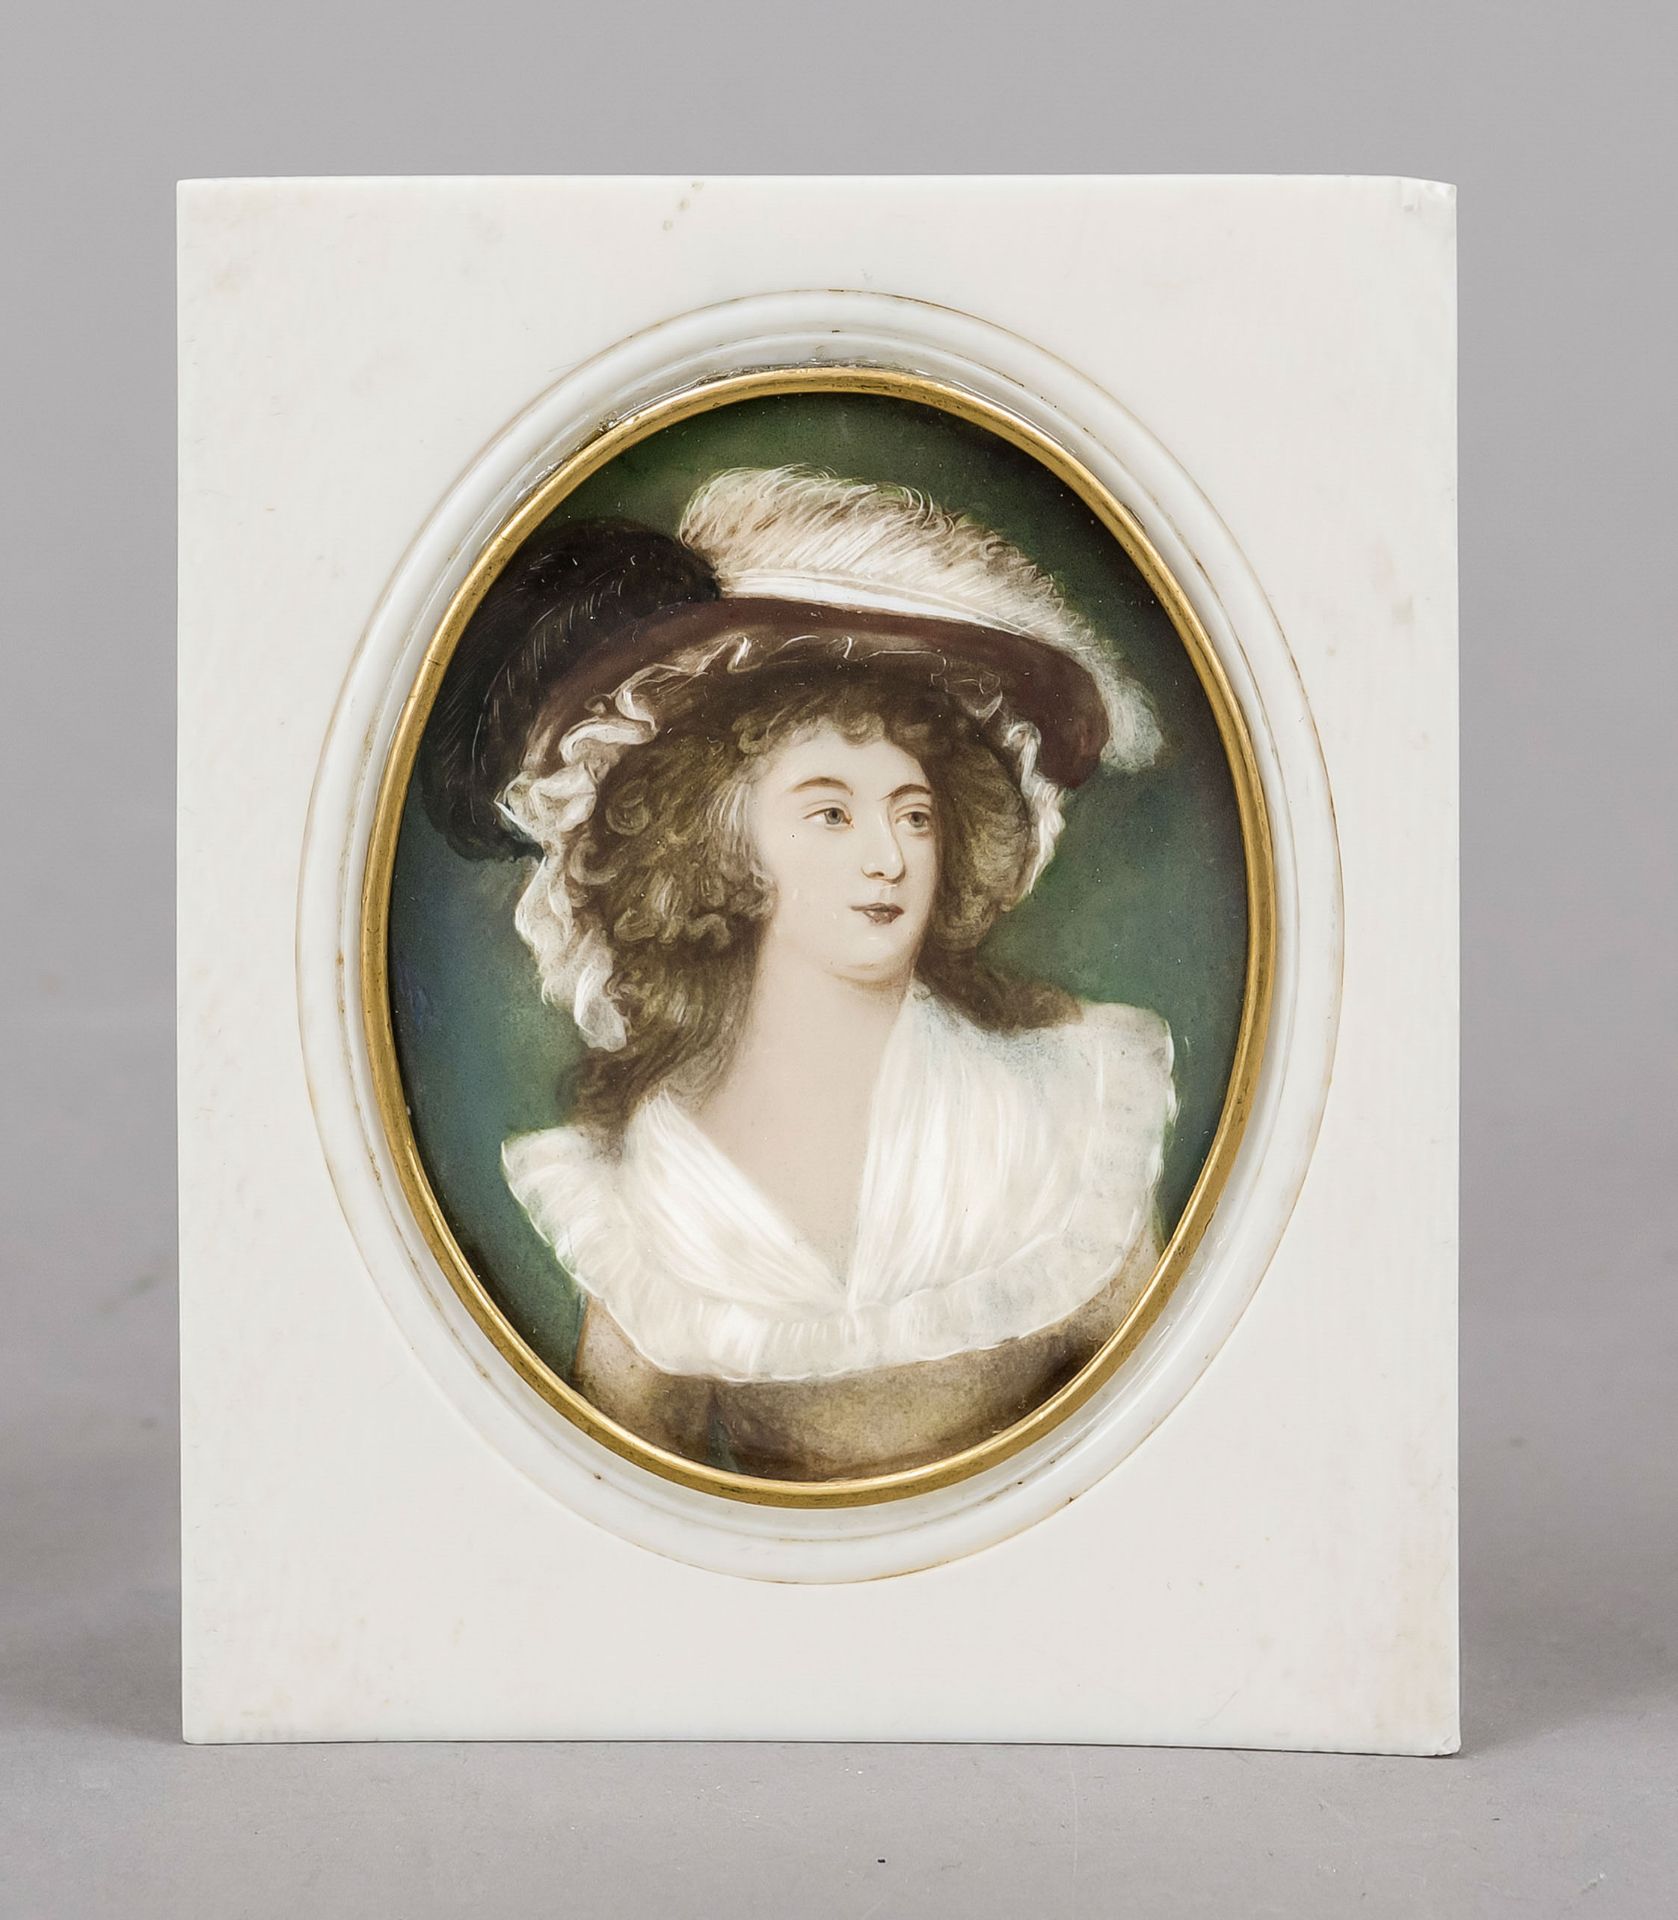 Miniature, 19th century, polychrome tempera painting on bone plate, unopened, oval bust portrait